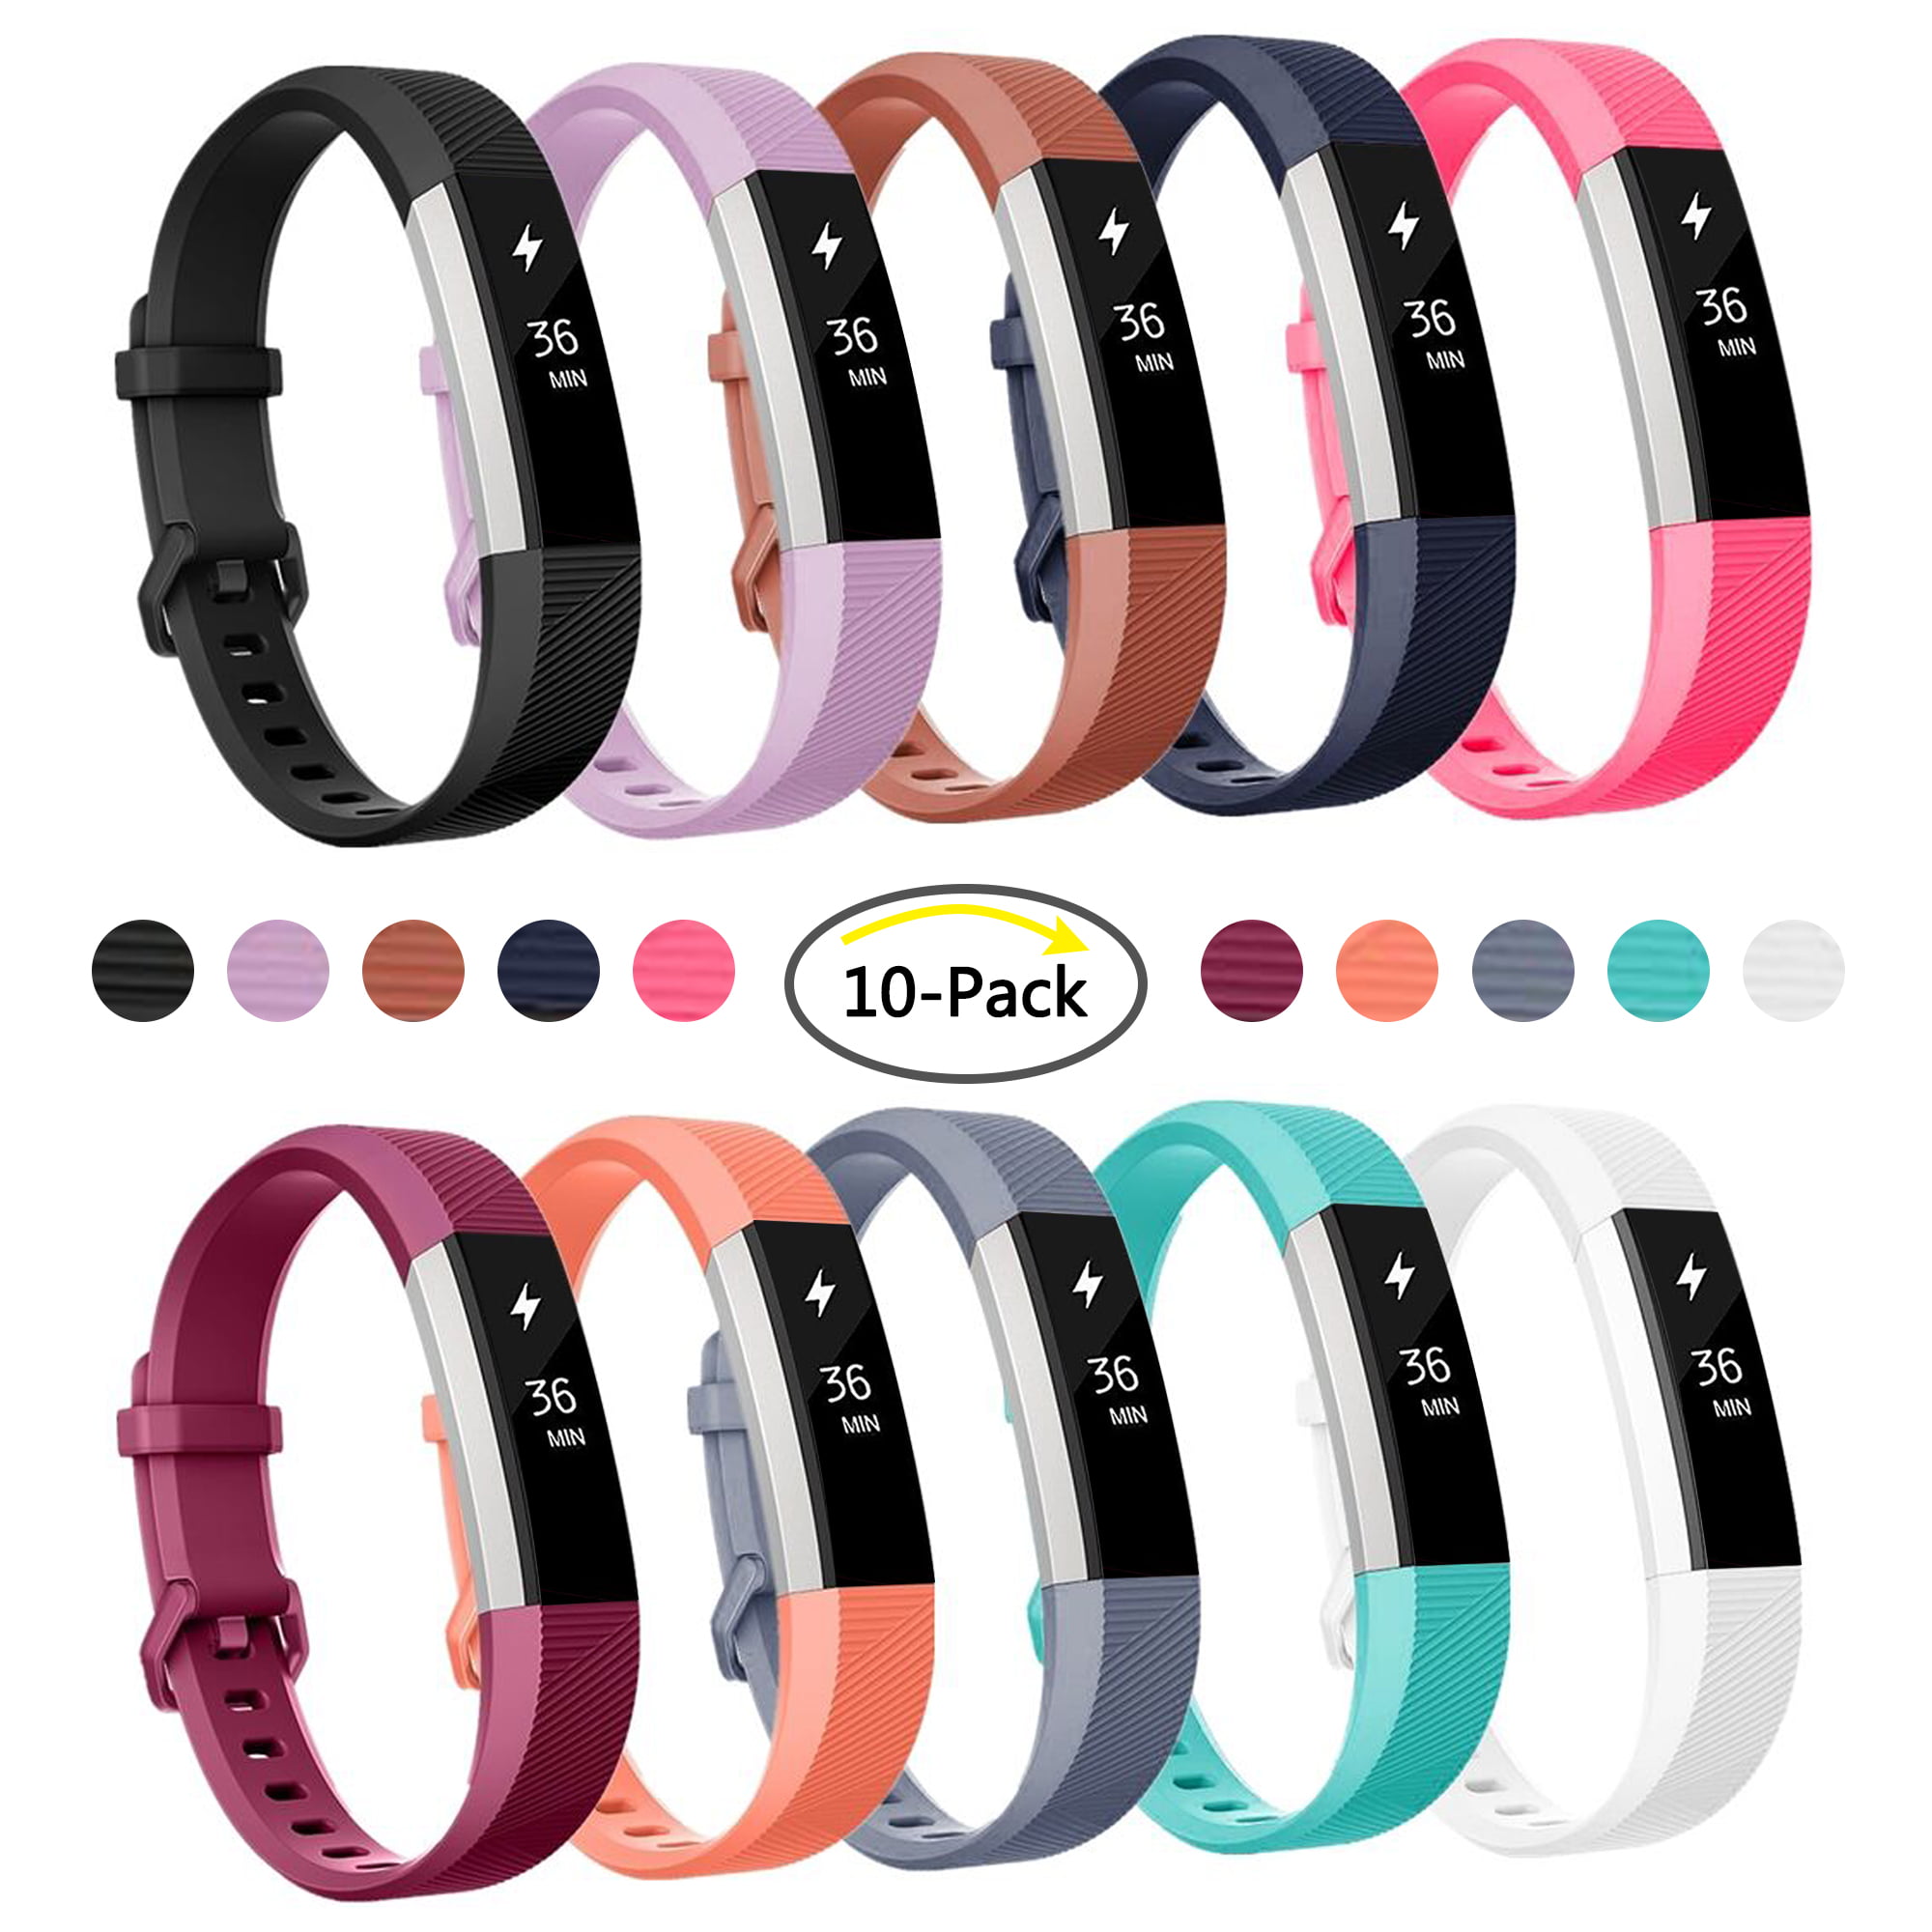 Details about   New Replacement For Fitbit Alta Silicone Sports Wrist Band Strap Clasp Buckle  r 